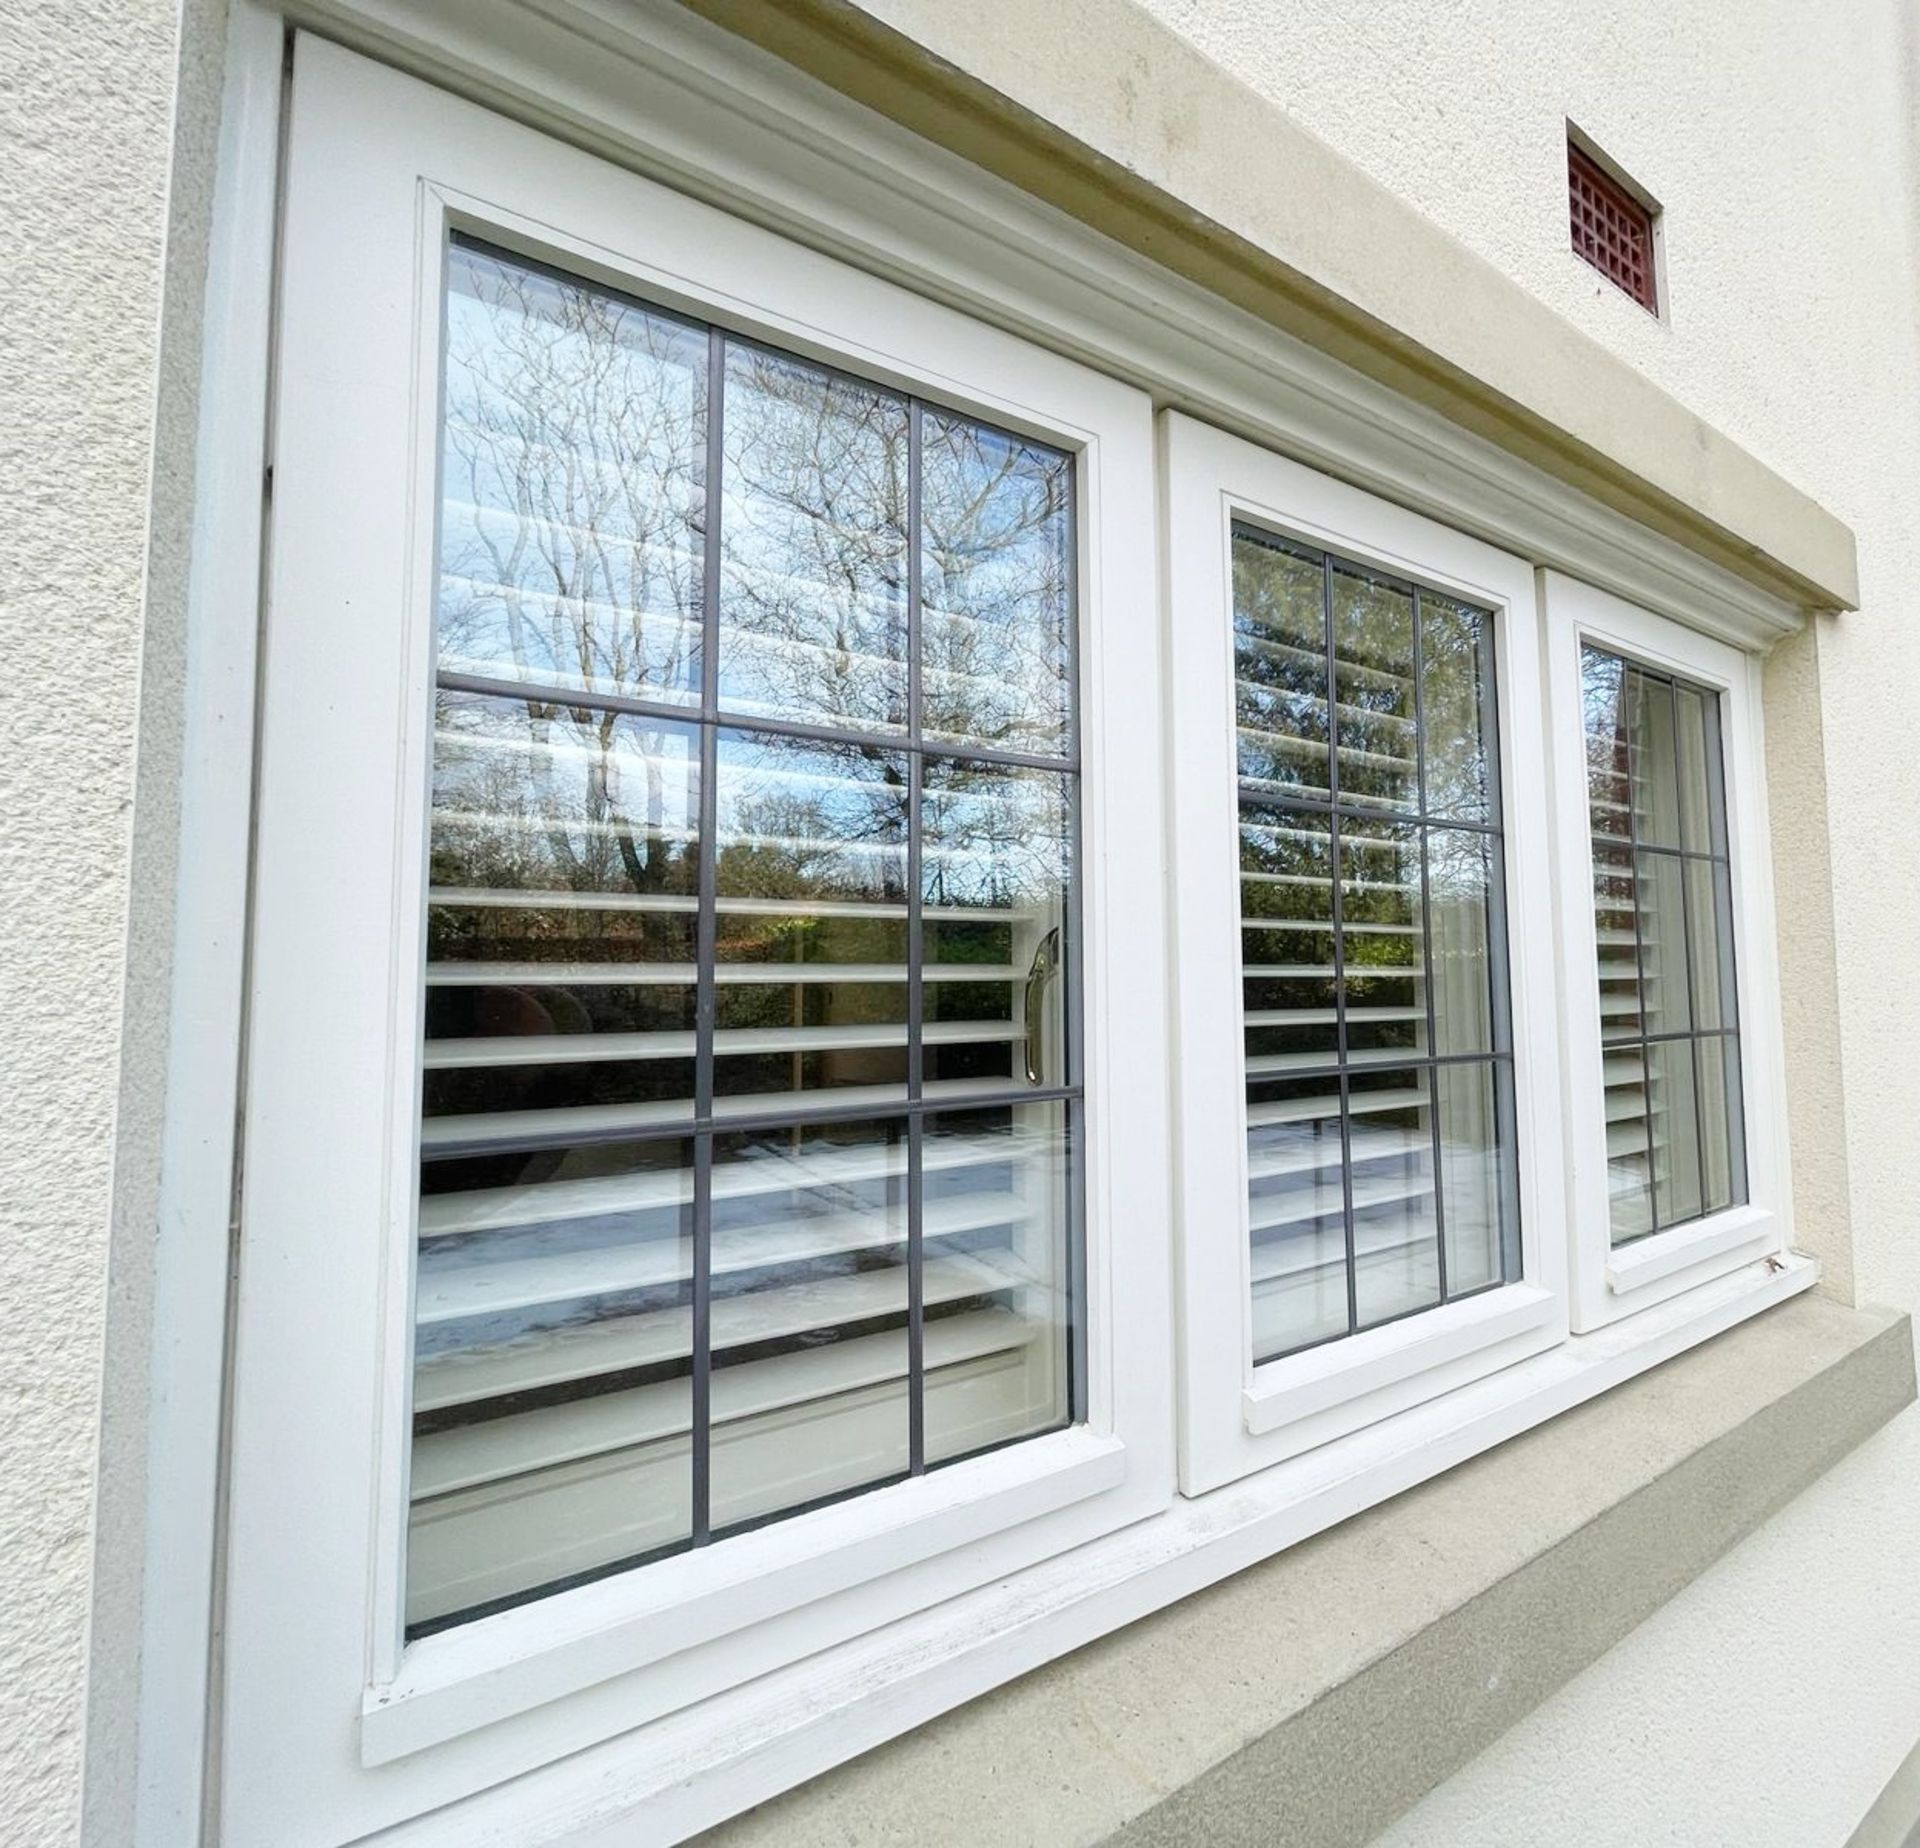 1 x Hardwood Timber Double Glazed Leaded 3-Pane Window Frame fitted with Shutter Blinds - Image 14 of 15